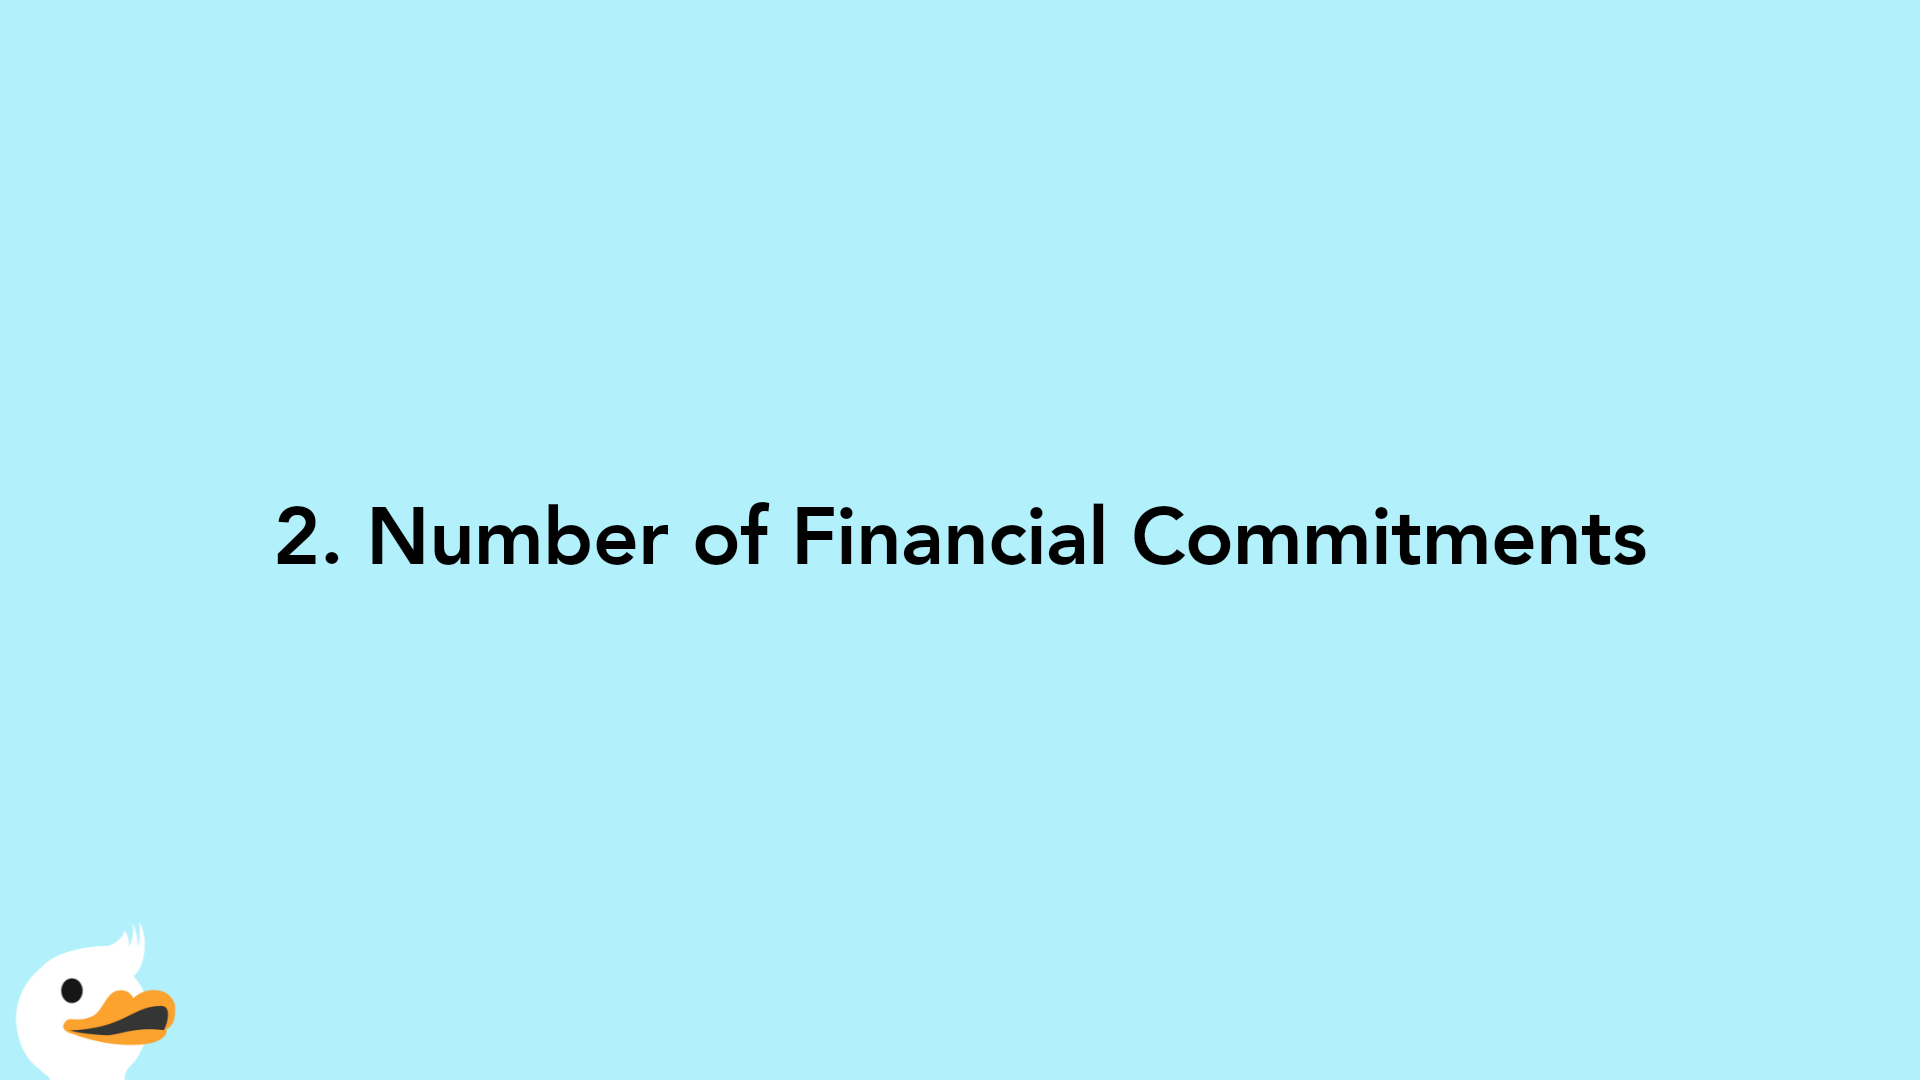 2. Number of Financial Commitments